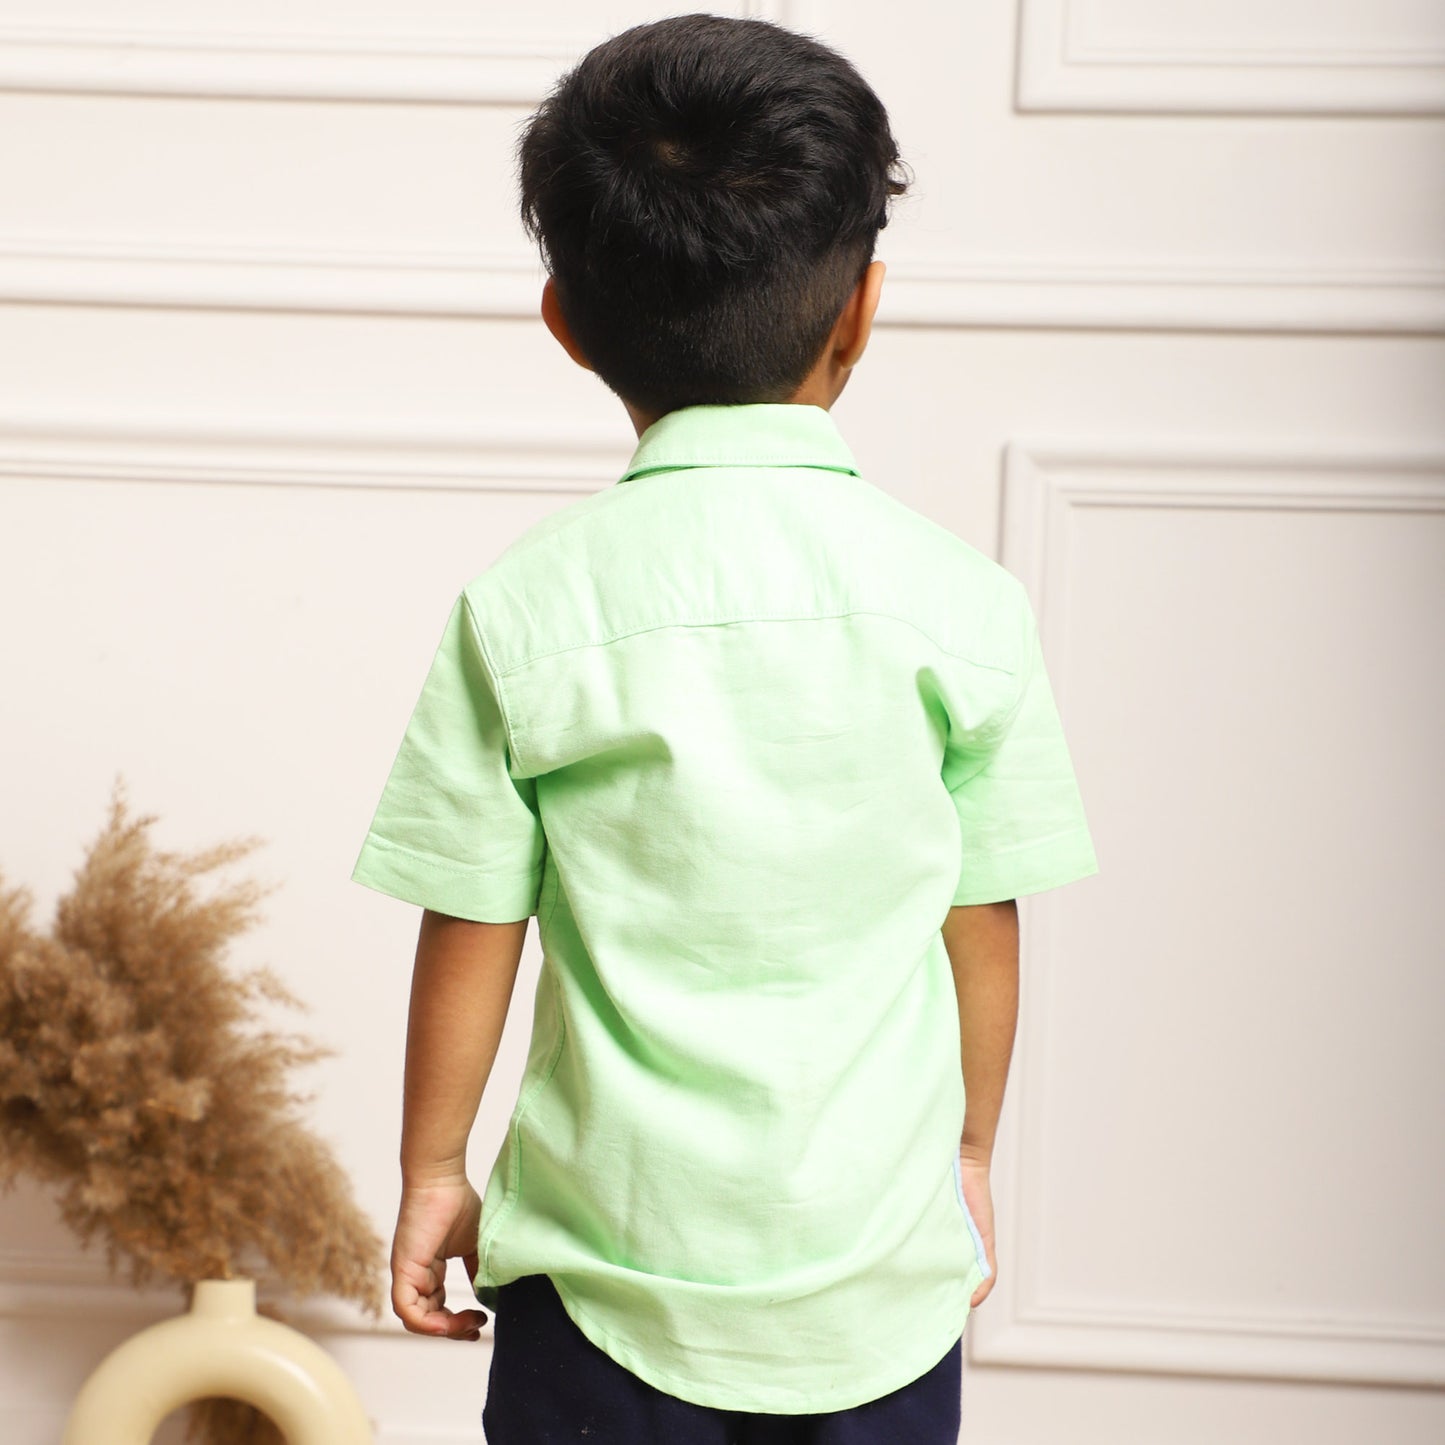 Polka Tots Cotton Half Sleeve Dual Color Patch Shirt - Green